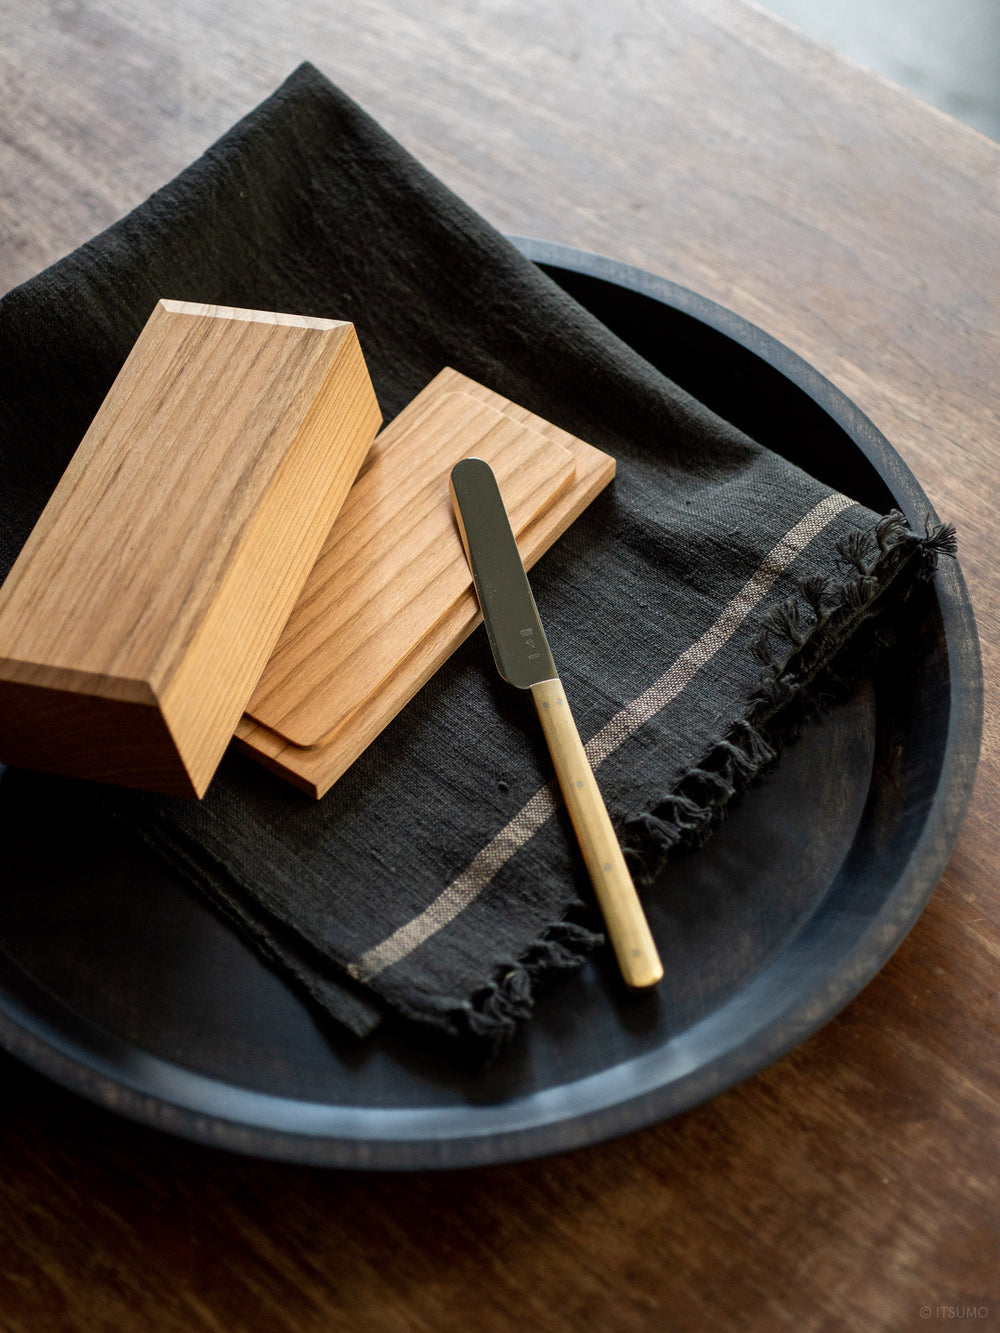 Azmaya cherry wood butter case next to a stainless steel brass handle butter knife, on top of a linen cloth and serving tray